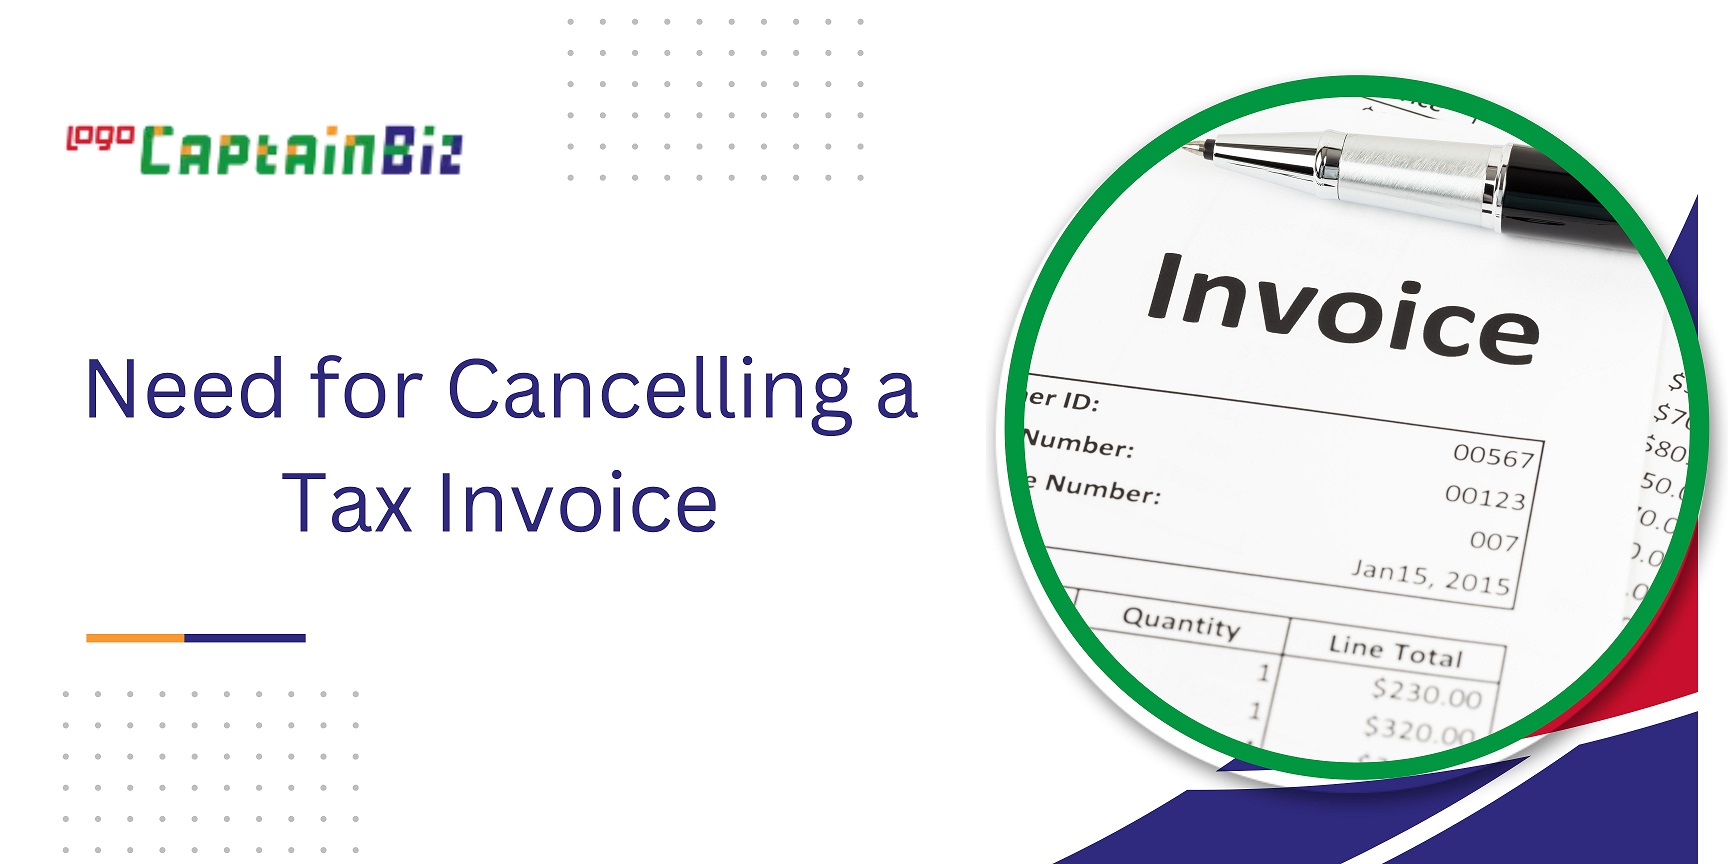 captainbiz need for cancelling a tax invoice